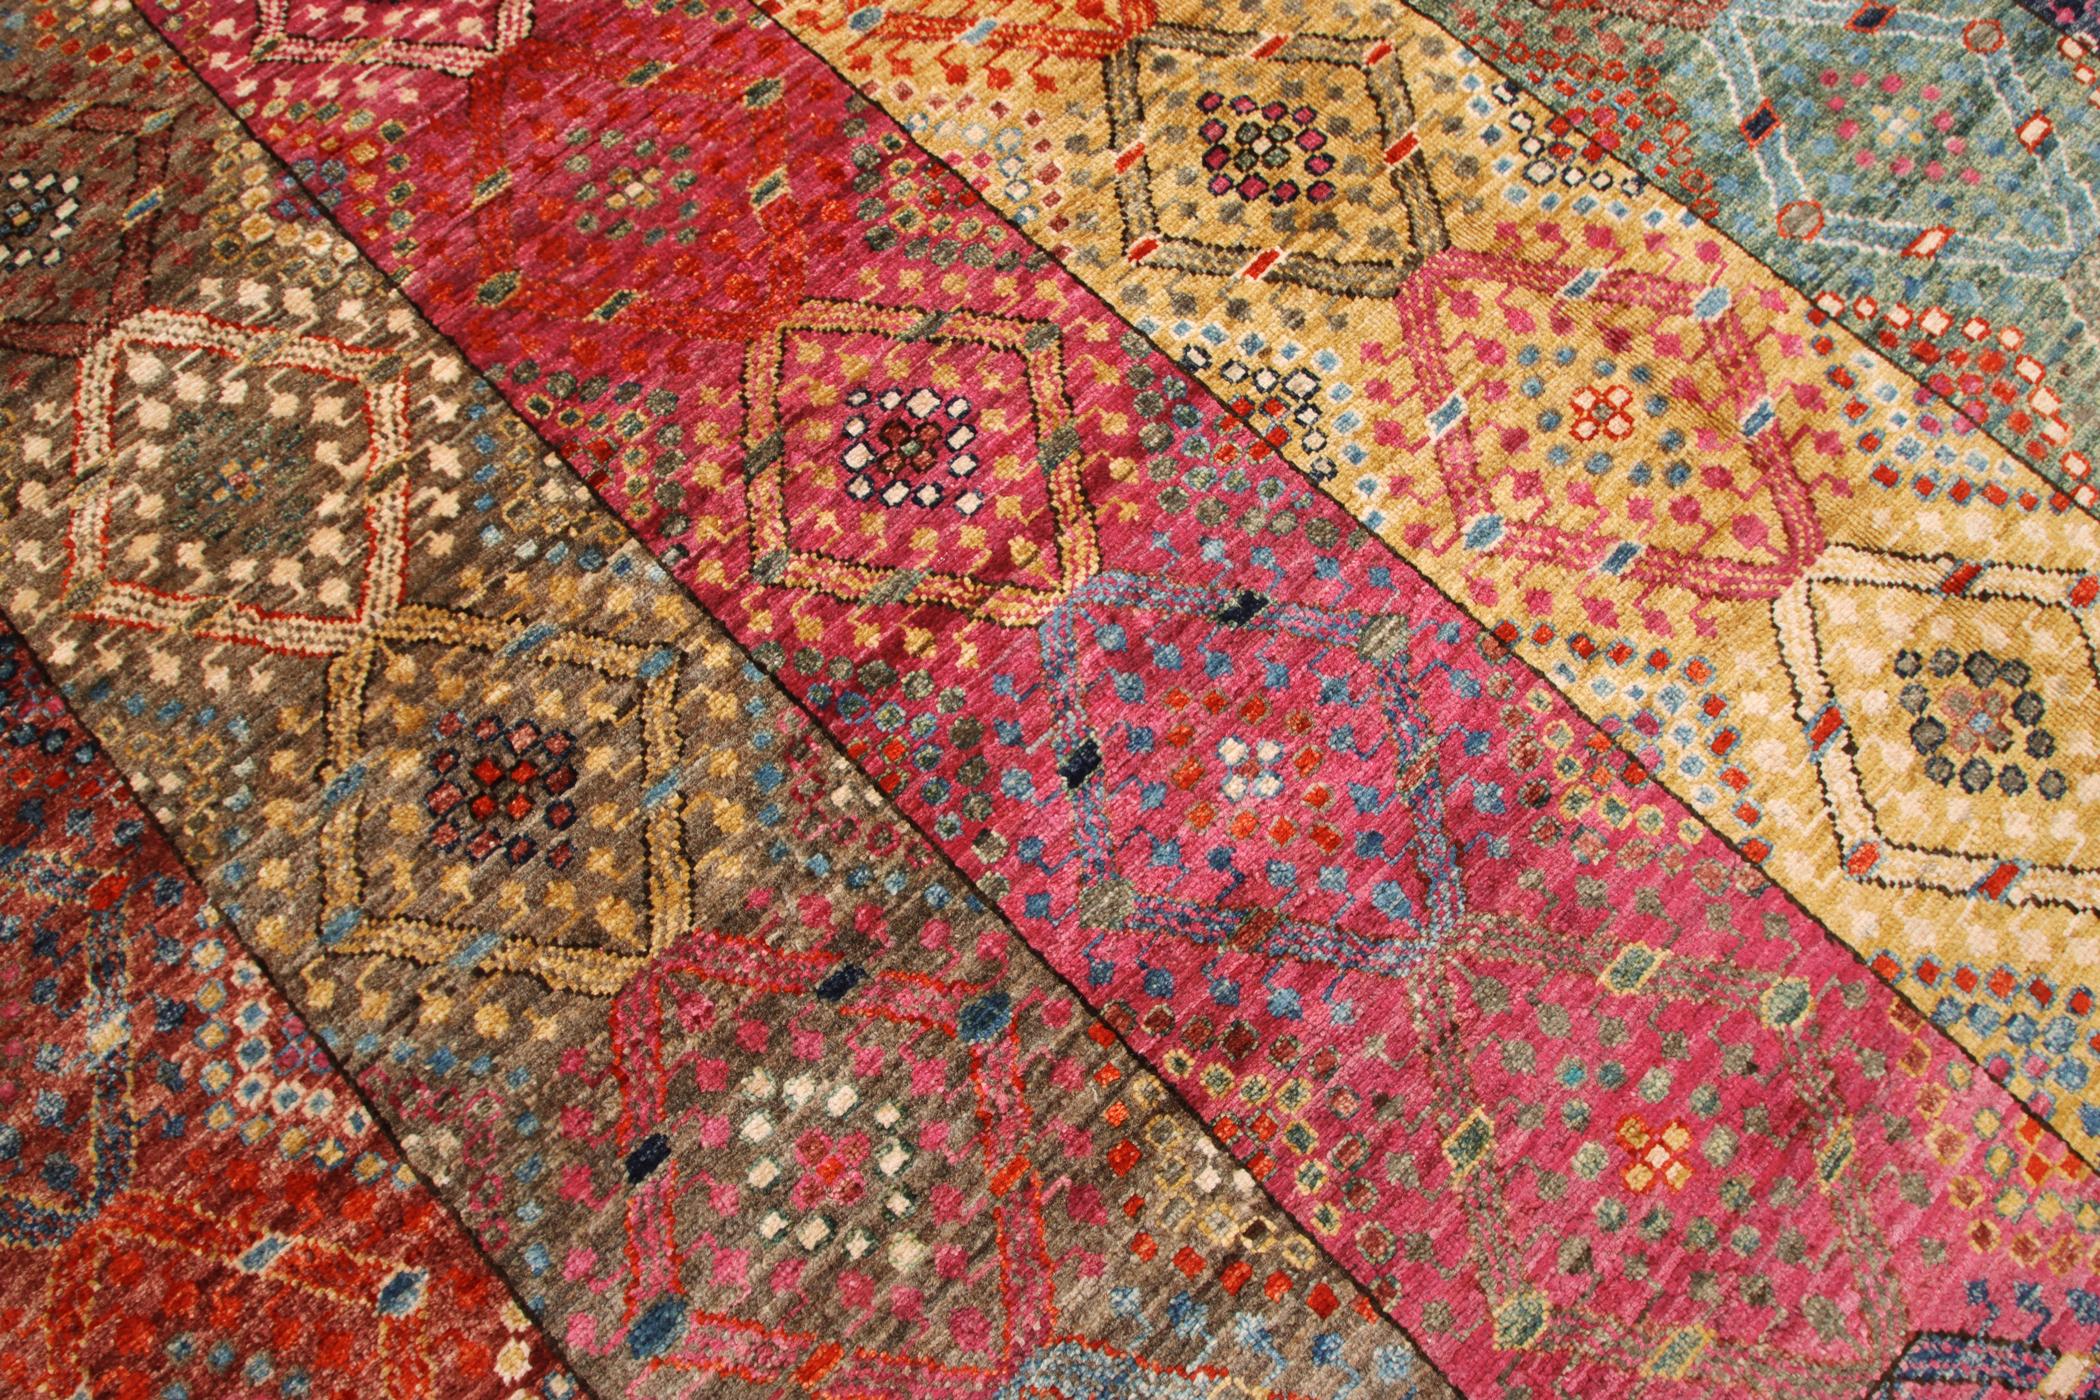 Nice hand made carpet by Turkoman weavers in Afghanistan all natural dyes and hand spun wool.
Shasavan style carpet.